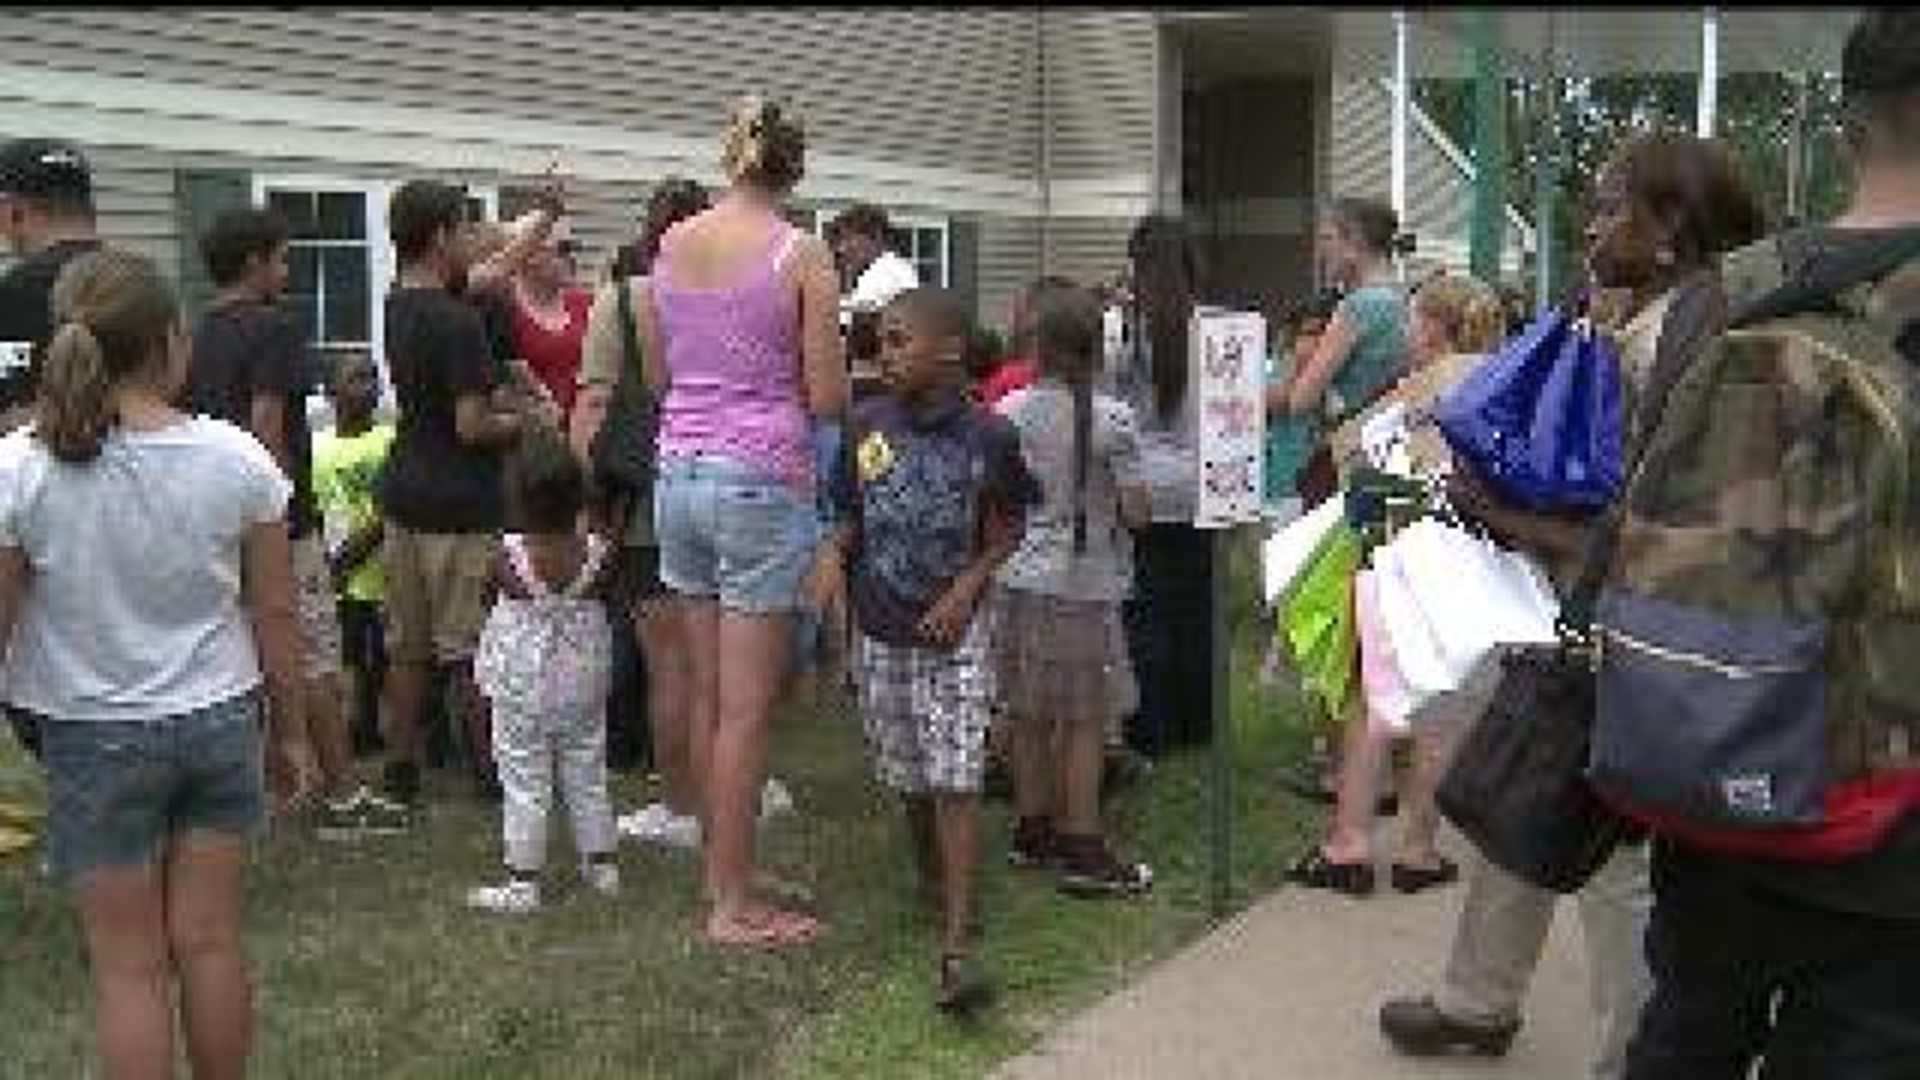 School supplies given to elementary students